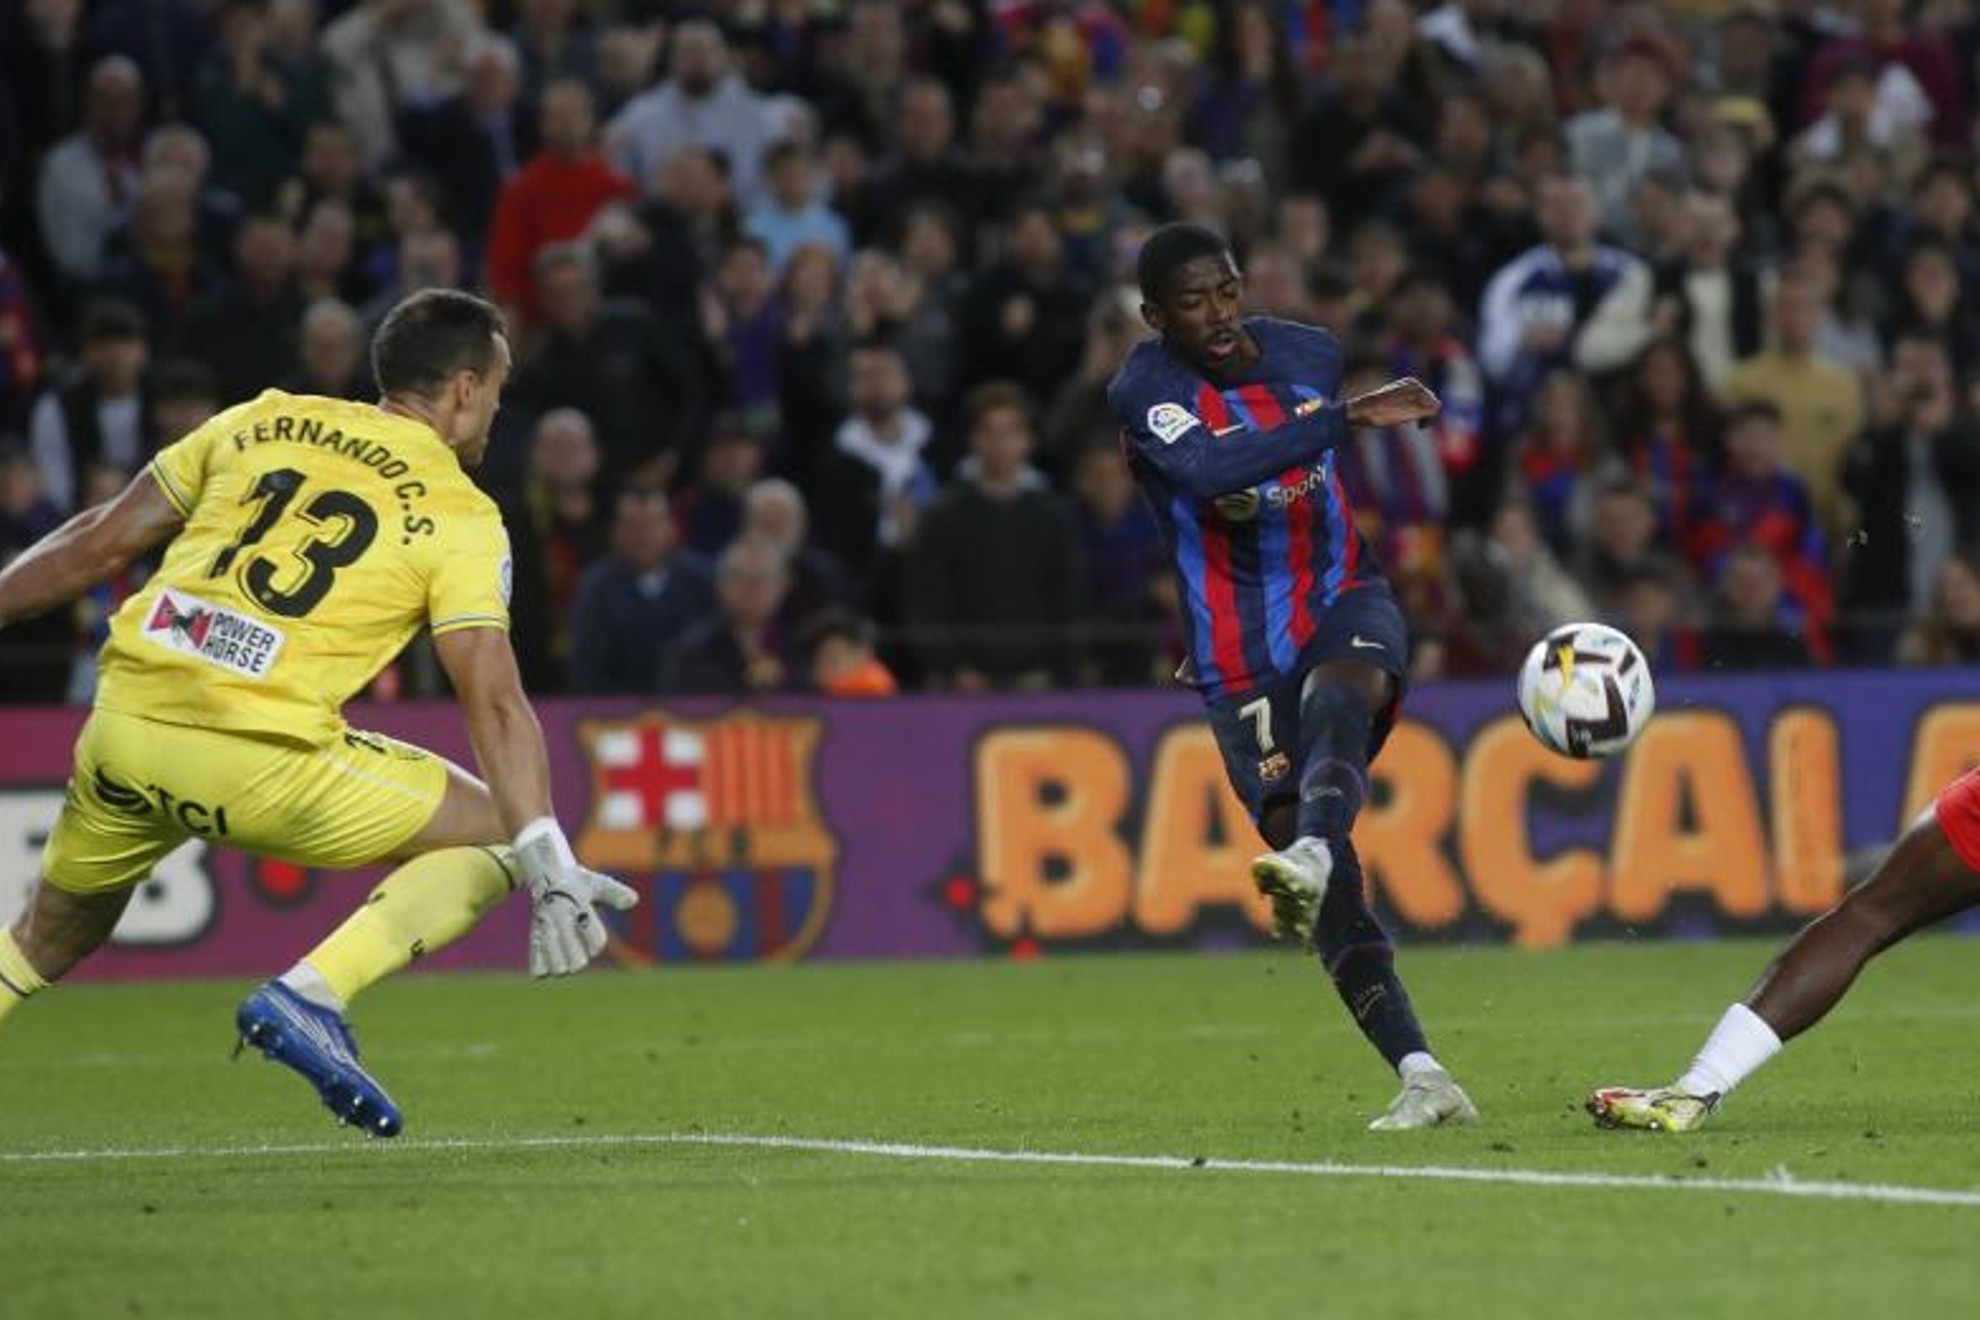 Dembele on the attack.